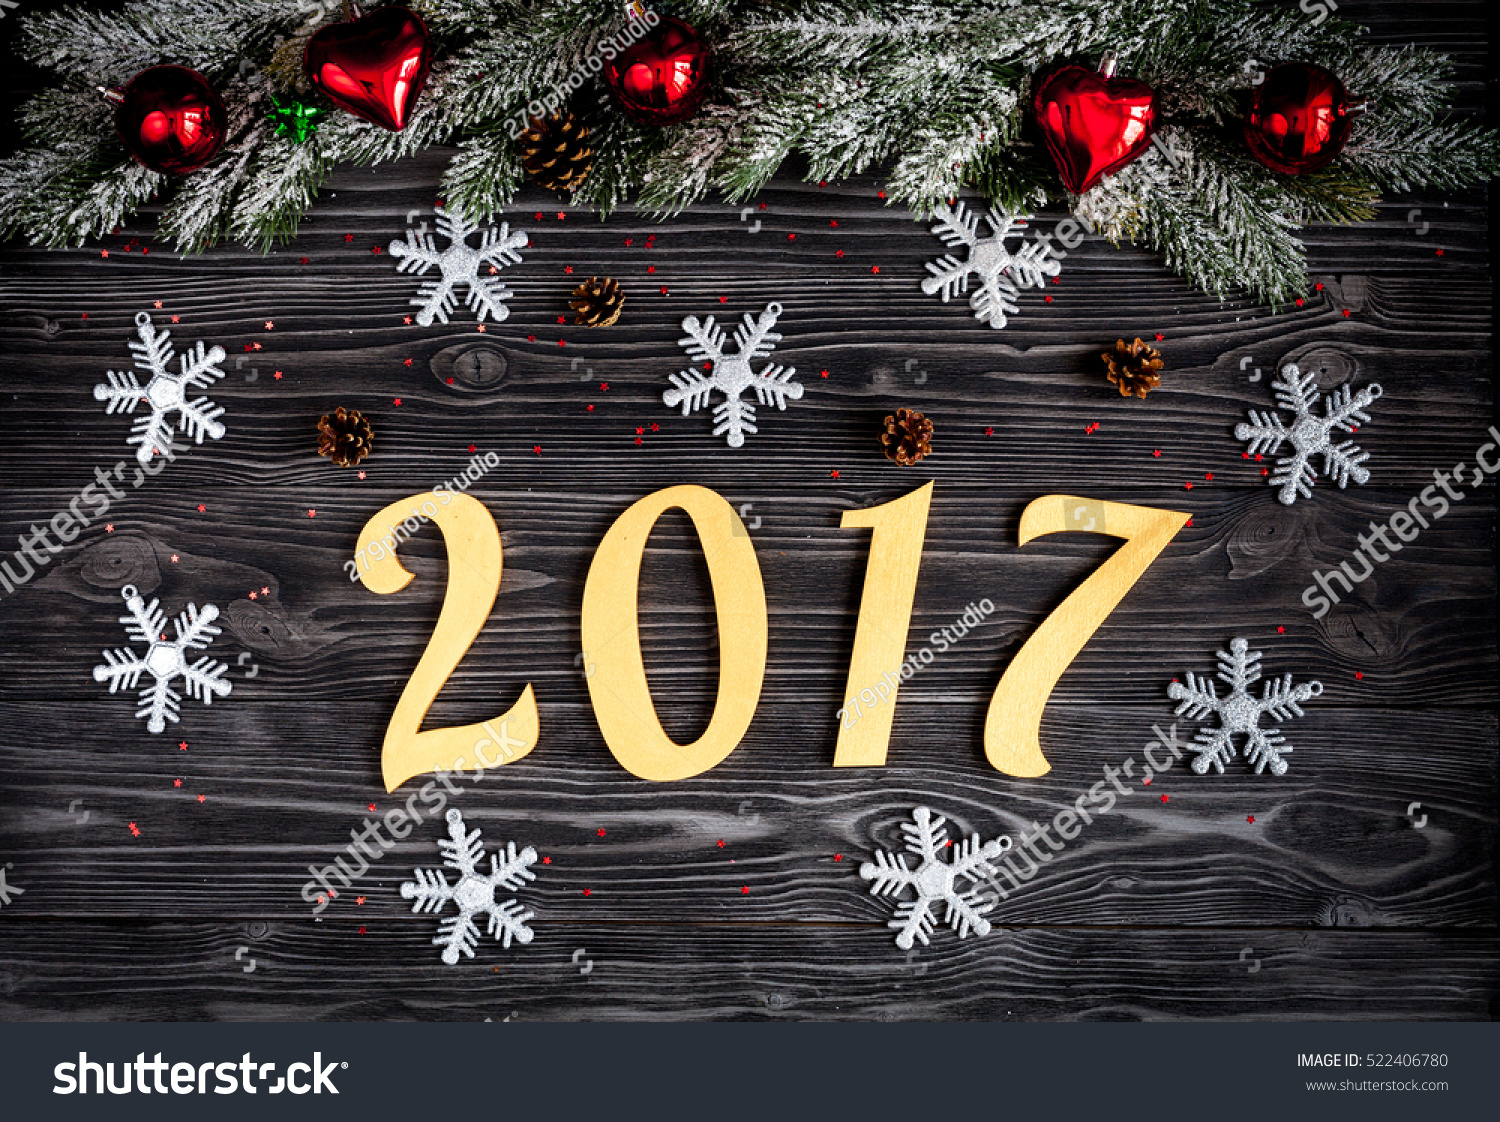 Christmas decorations, spruce branches on dark wooden background top view #522406780